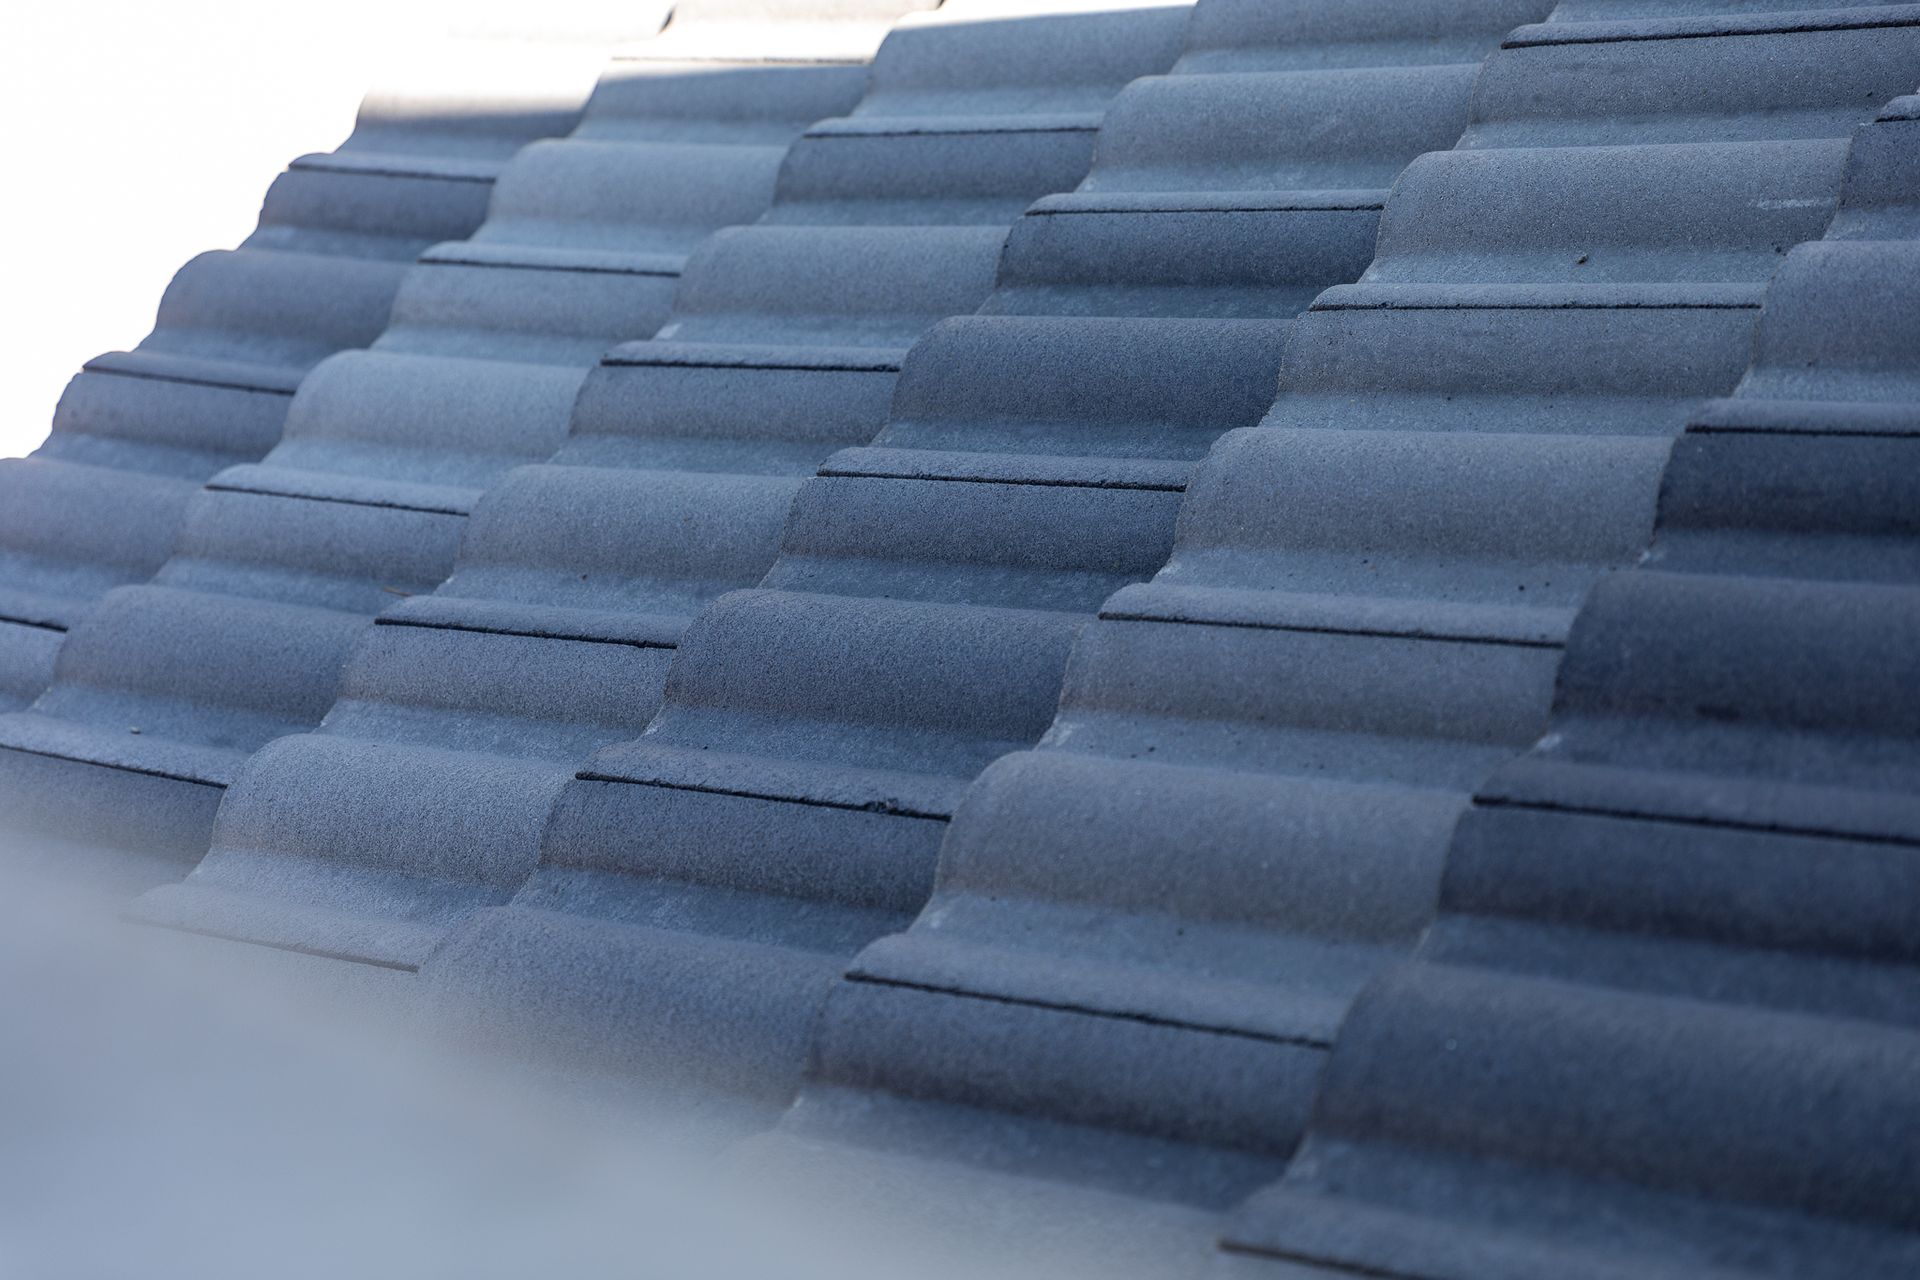 a close up of a gray tile roof